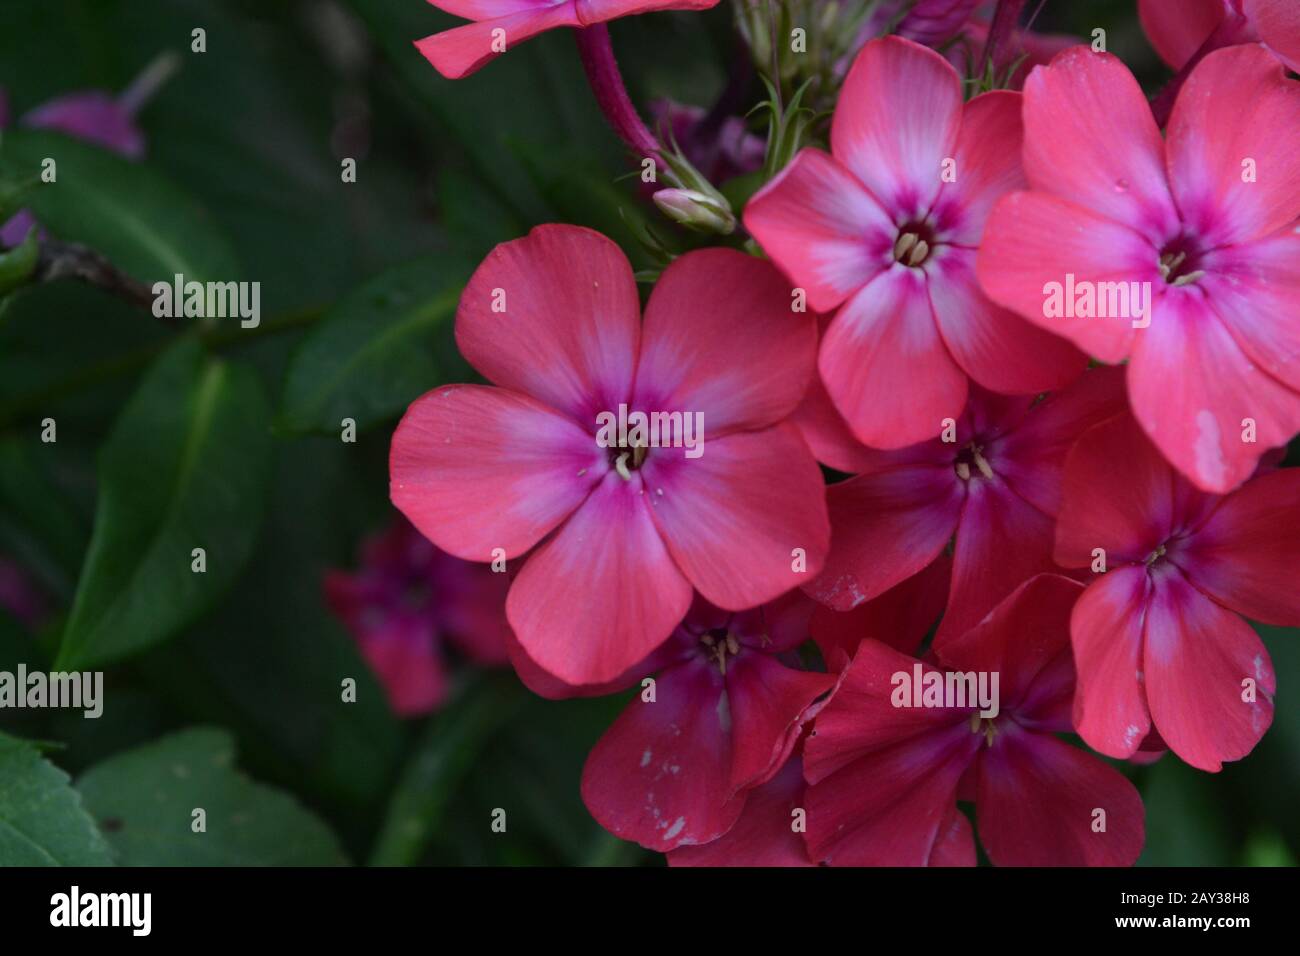 Phlox. Polemoniaceae. Beautiful inflorescence. Flowers pink. Growing flowers. Flowerbed. Garden. Floriculture. On blurred background. Close-up. Horizo Stock Photo